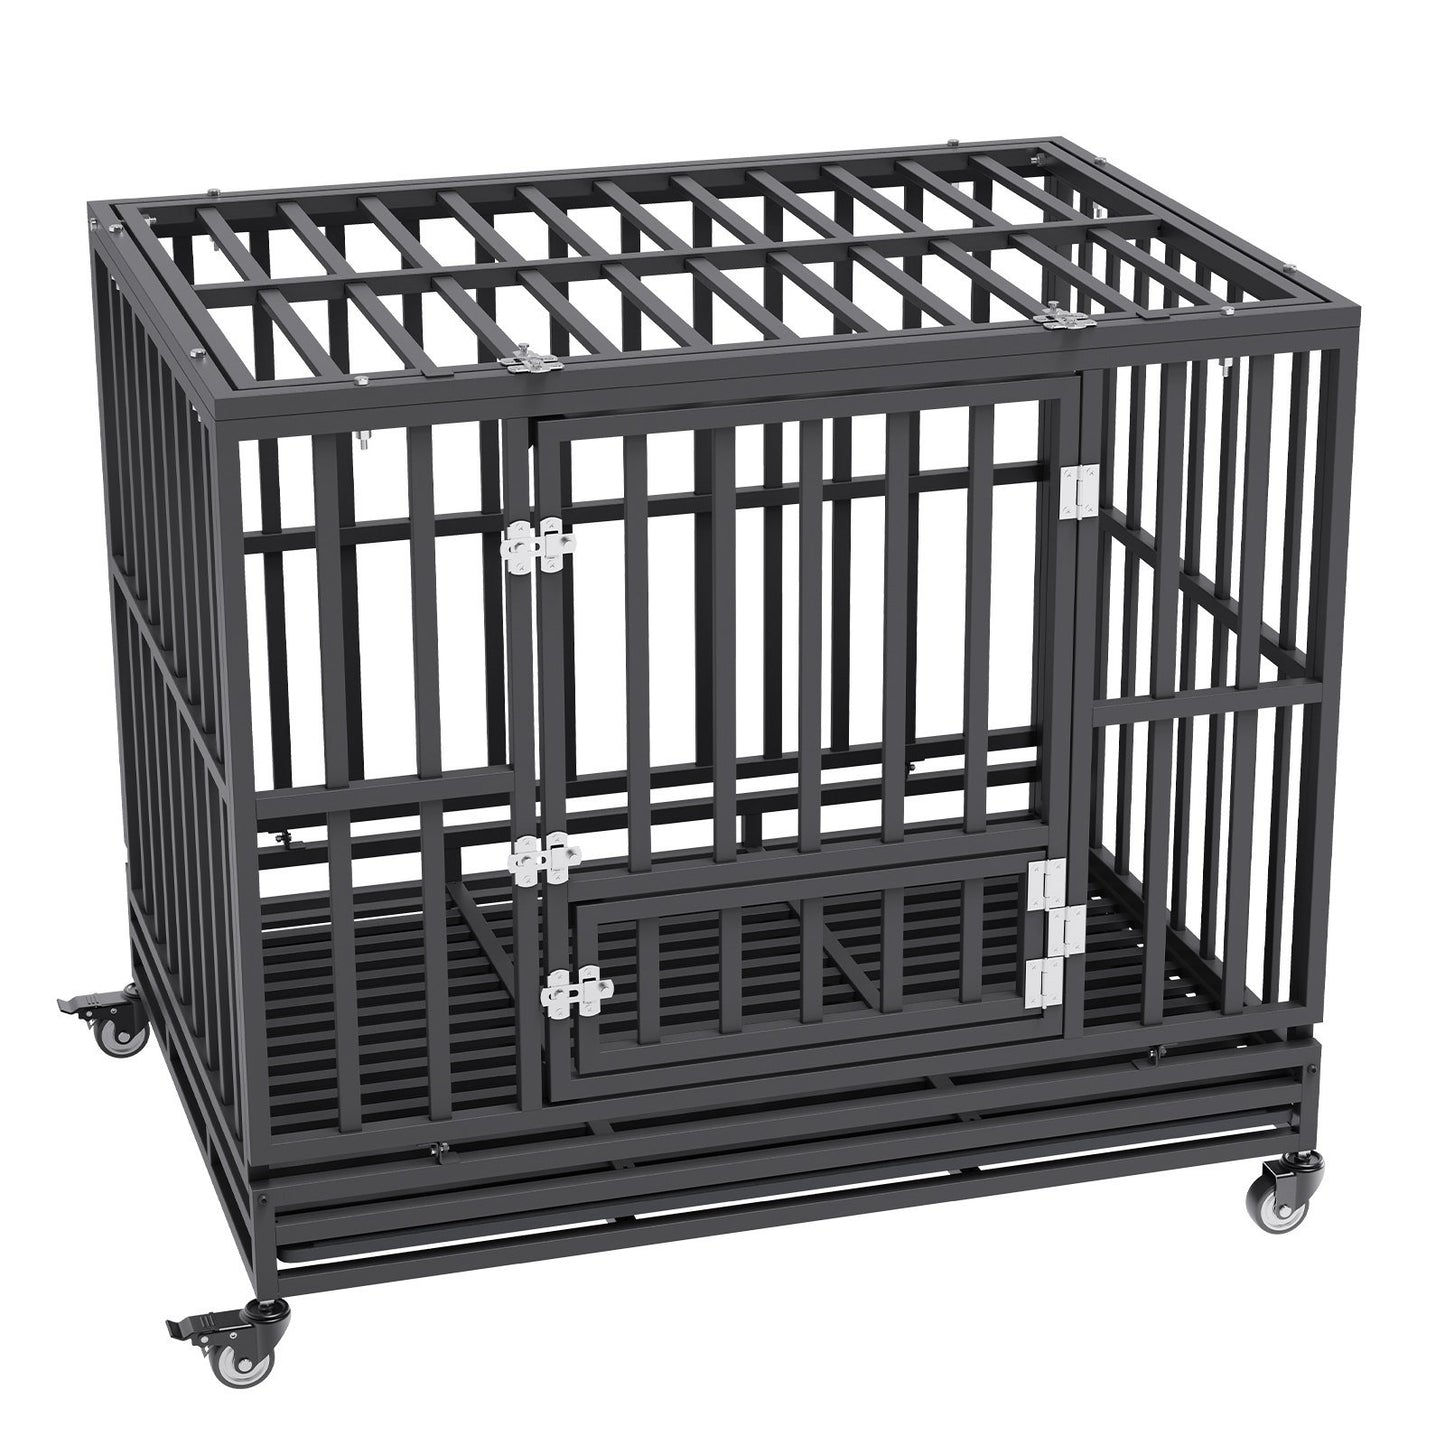 42 Inch Heavy Duty Dog Crate, Indestructible Dog Crate, 3-Door Heavy Duty Dog Kennel for Medium to Large Dogs with Lockable Wheels and Removable Tray, High Anxiety Dog Crate for Indoor & Outdoor